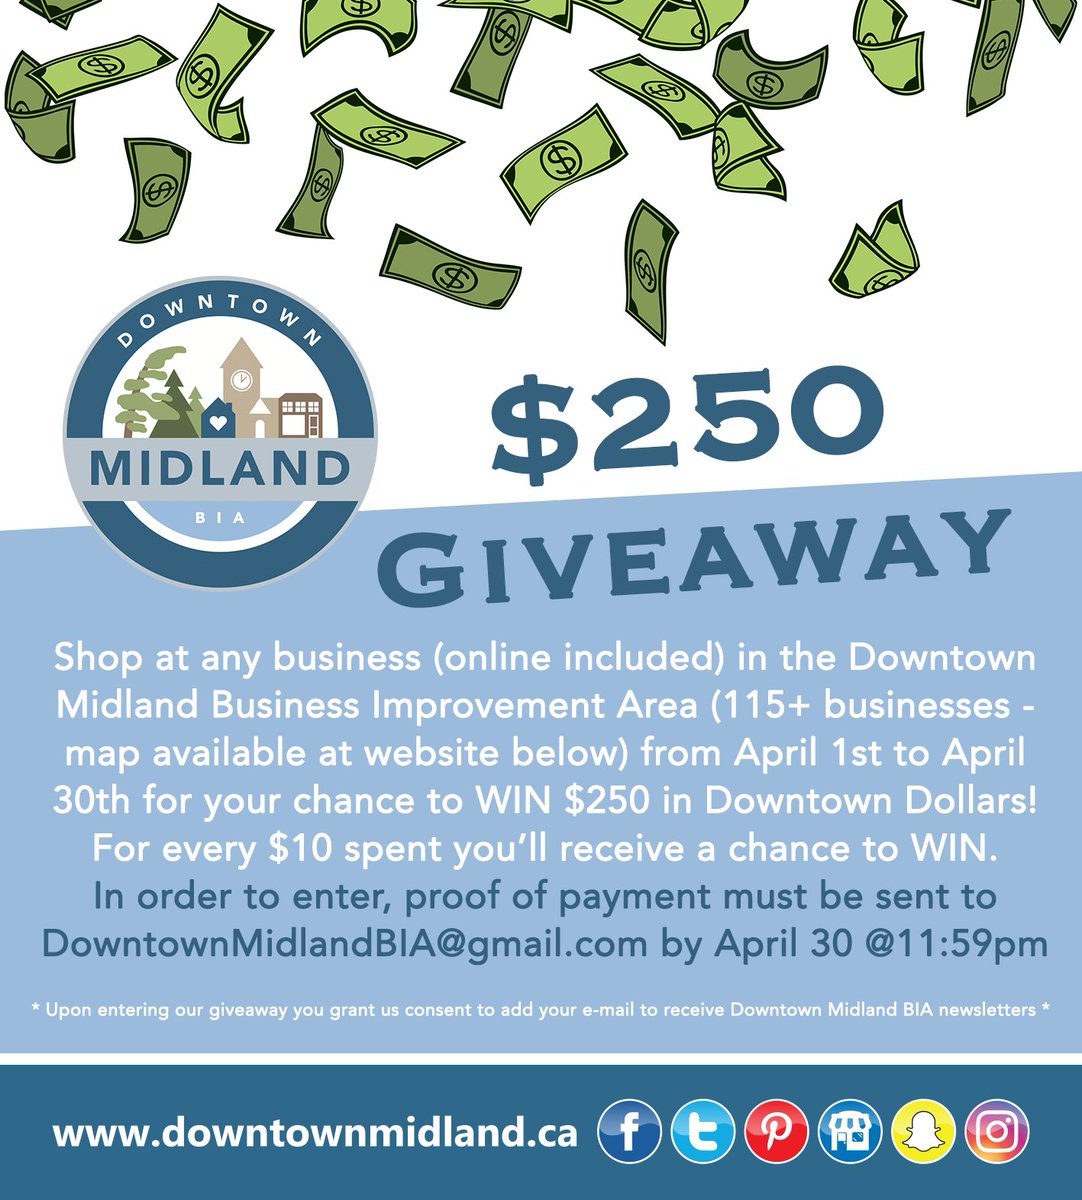 2 DAYS LEFT! ** WIN $250 ** Shop at any business in the Downtown Midland BIA (115+ businesses) from April 1st to April 30th for your chance to WIN $250 in Downtown Dollars! DETAILS: downtownmidland.ca/shoponline COMPLETE LIST OF ALL BUSINESS OPERATIONS: downtownmidland.ca